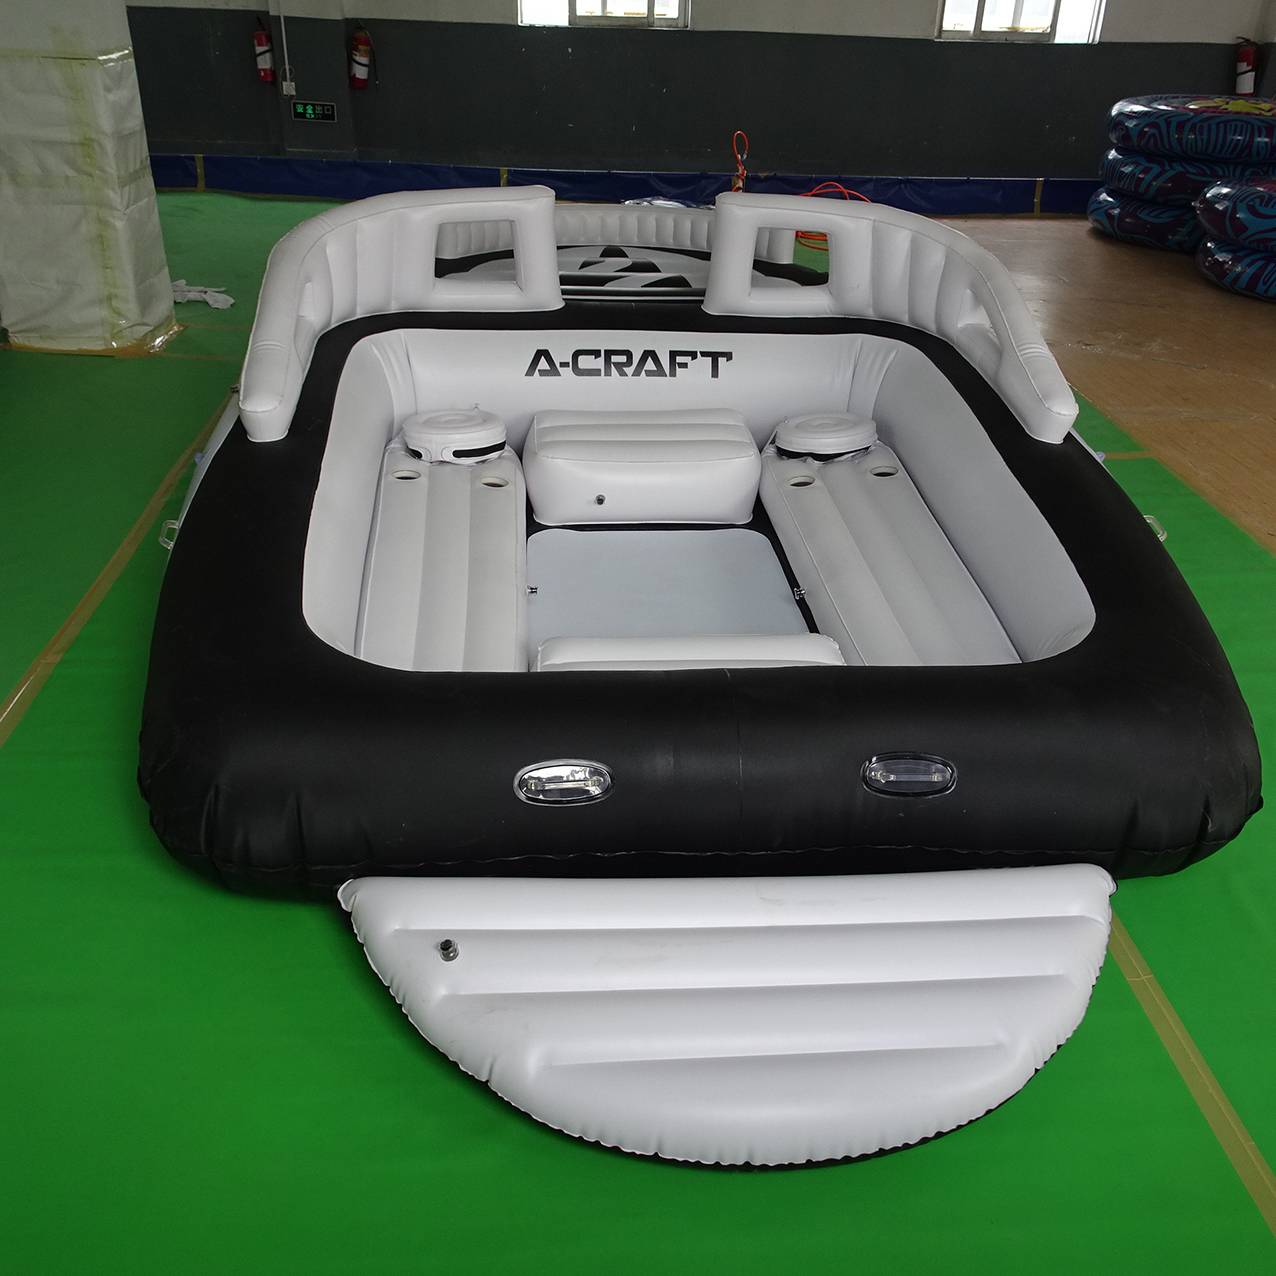 Bay Breezing Black Inflatable 6-Person Pool Floating Boats